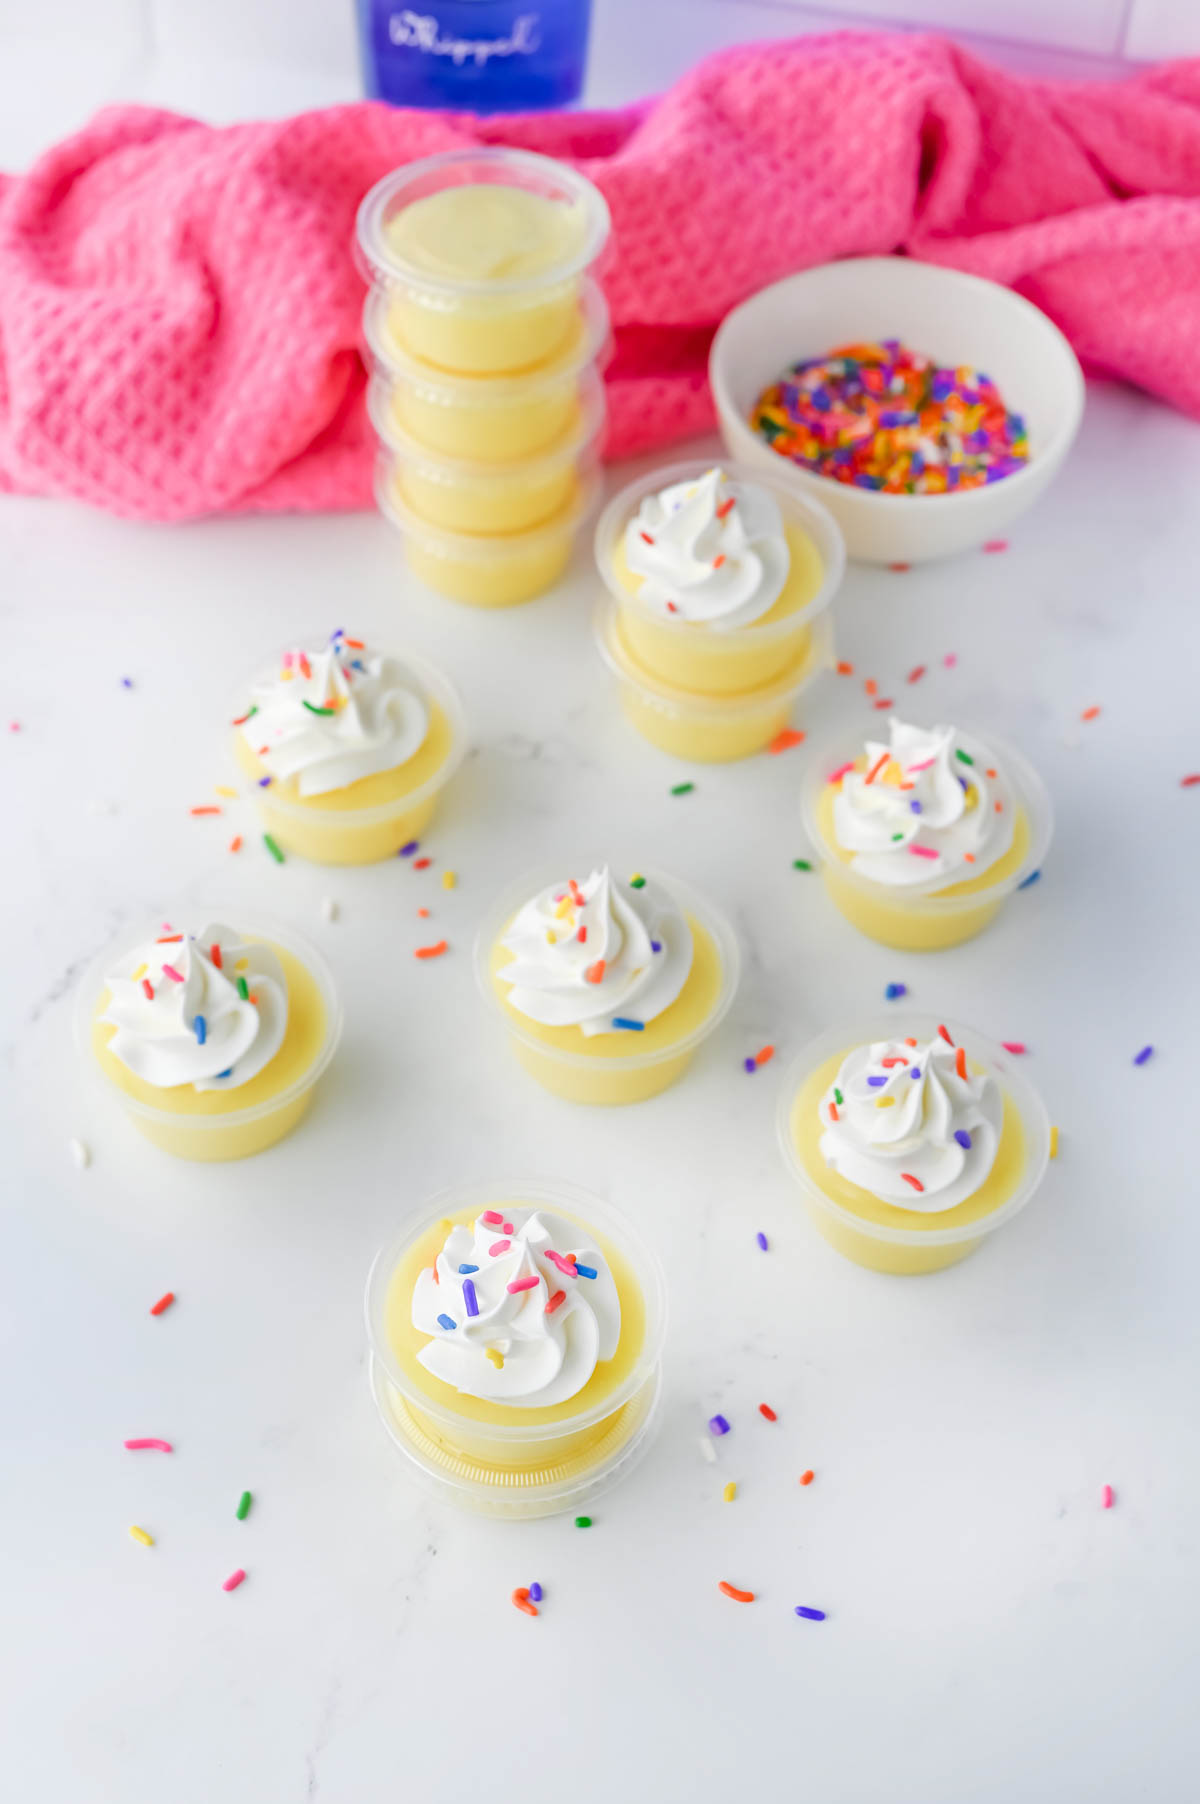 Cupcakes with whipped cream and sprinkles on a white table.